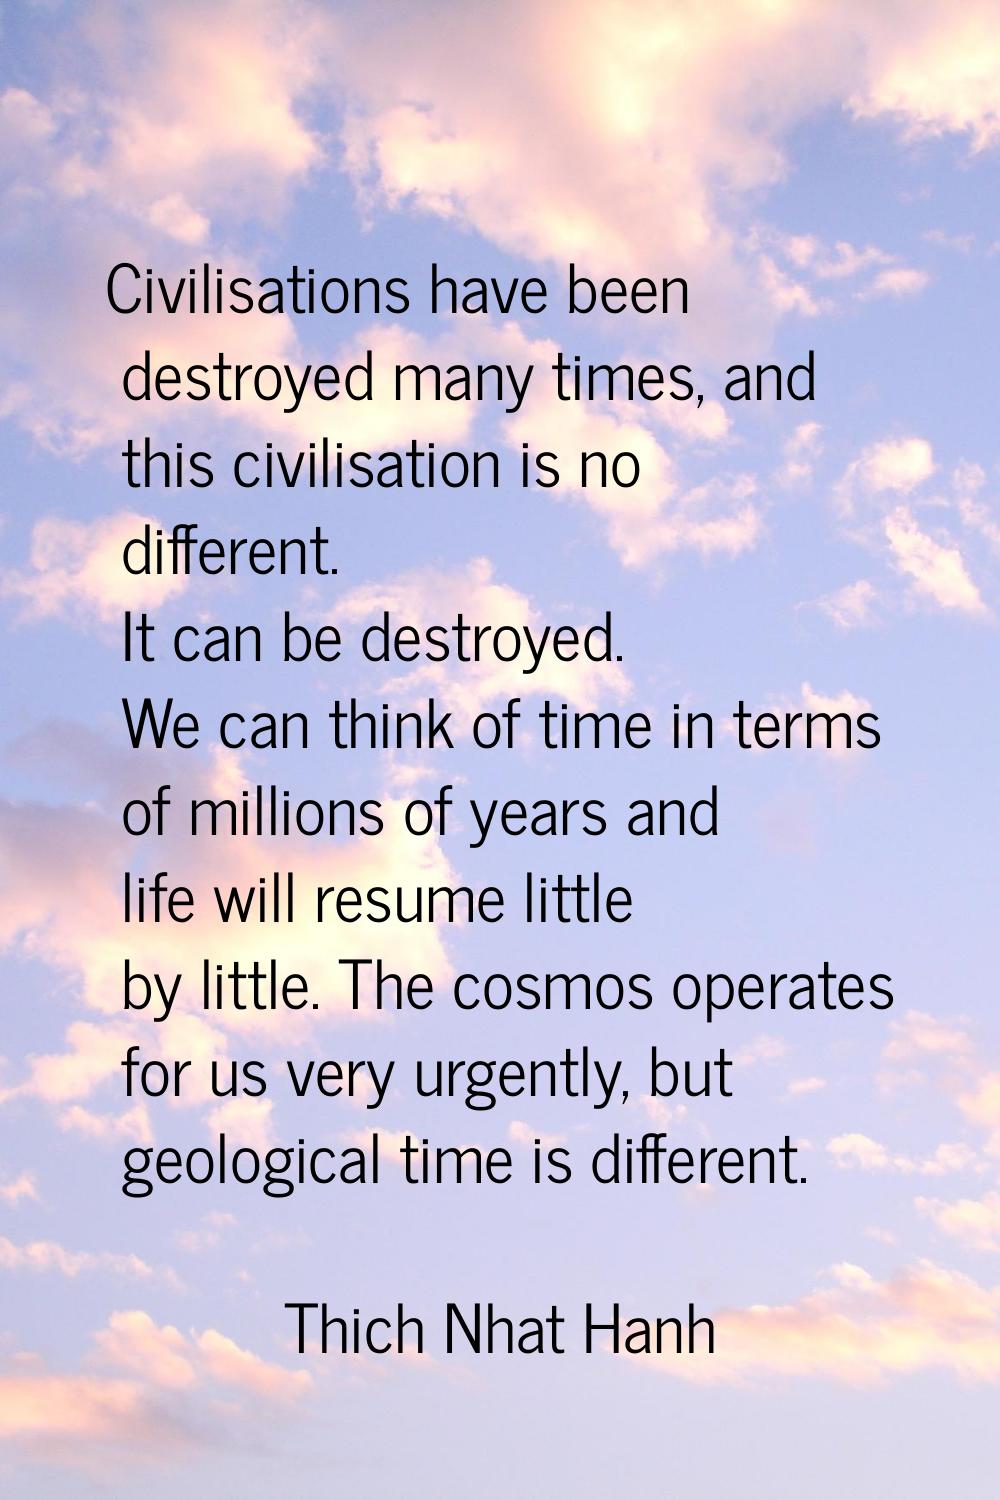 Civilisations have been destroyed many times, and this civilisation is no different. It can be dest